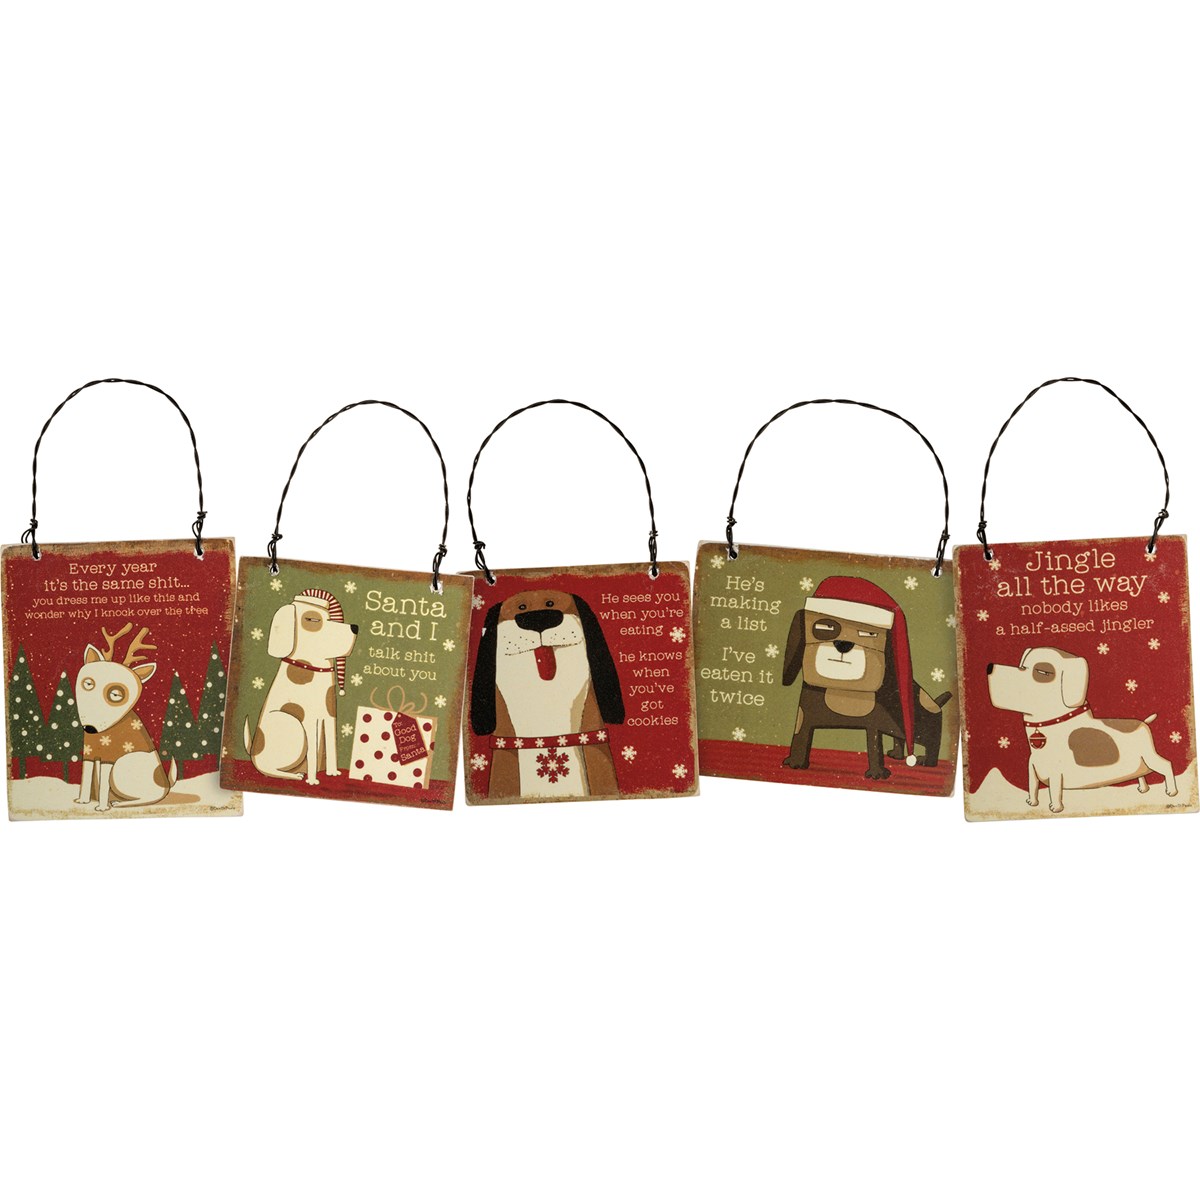 Sassy Dogs Ornament Set - Wood, Paper, Wire